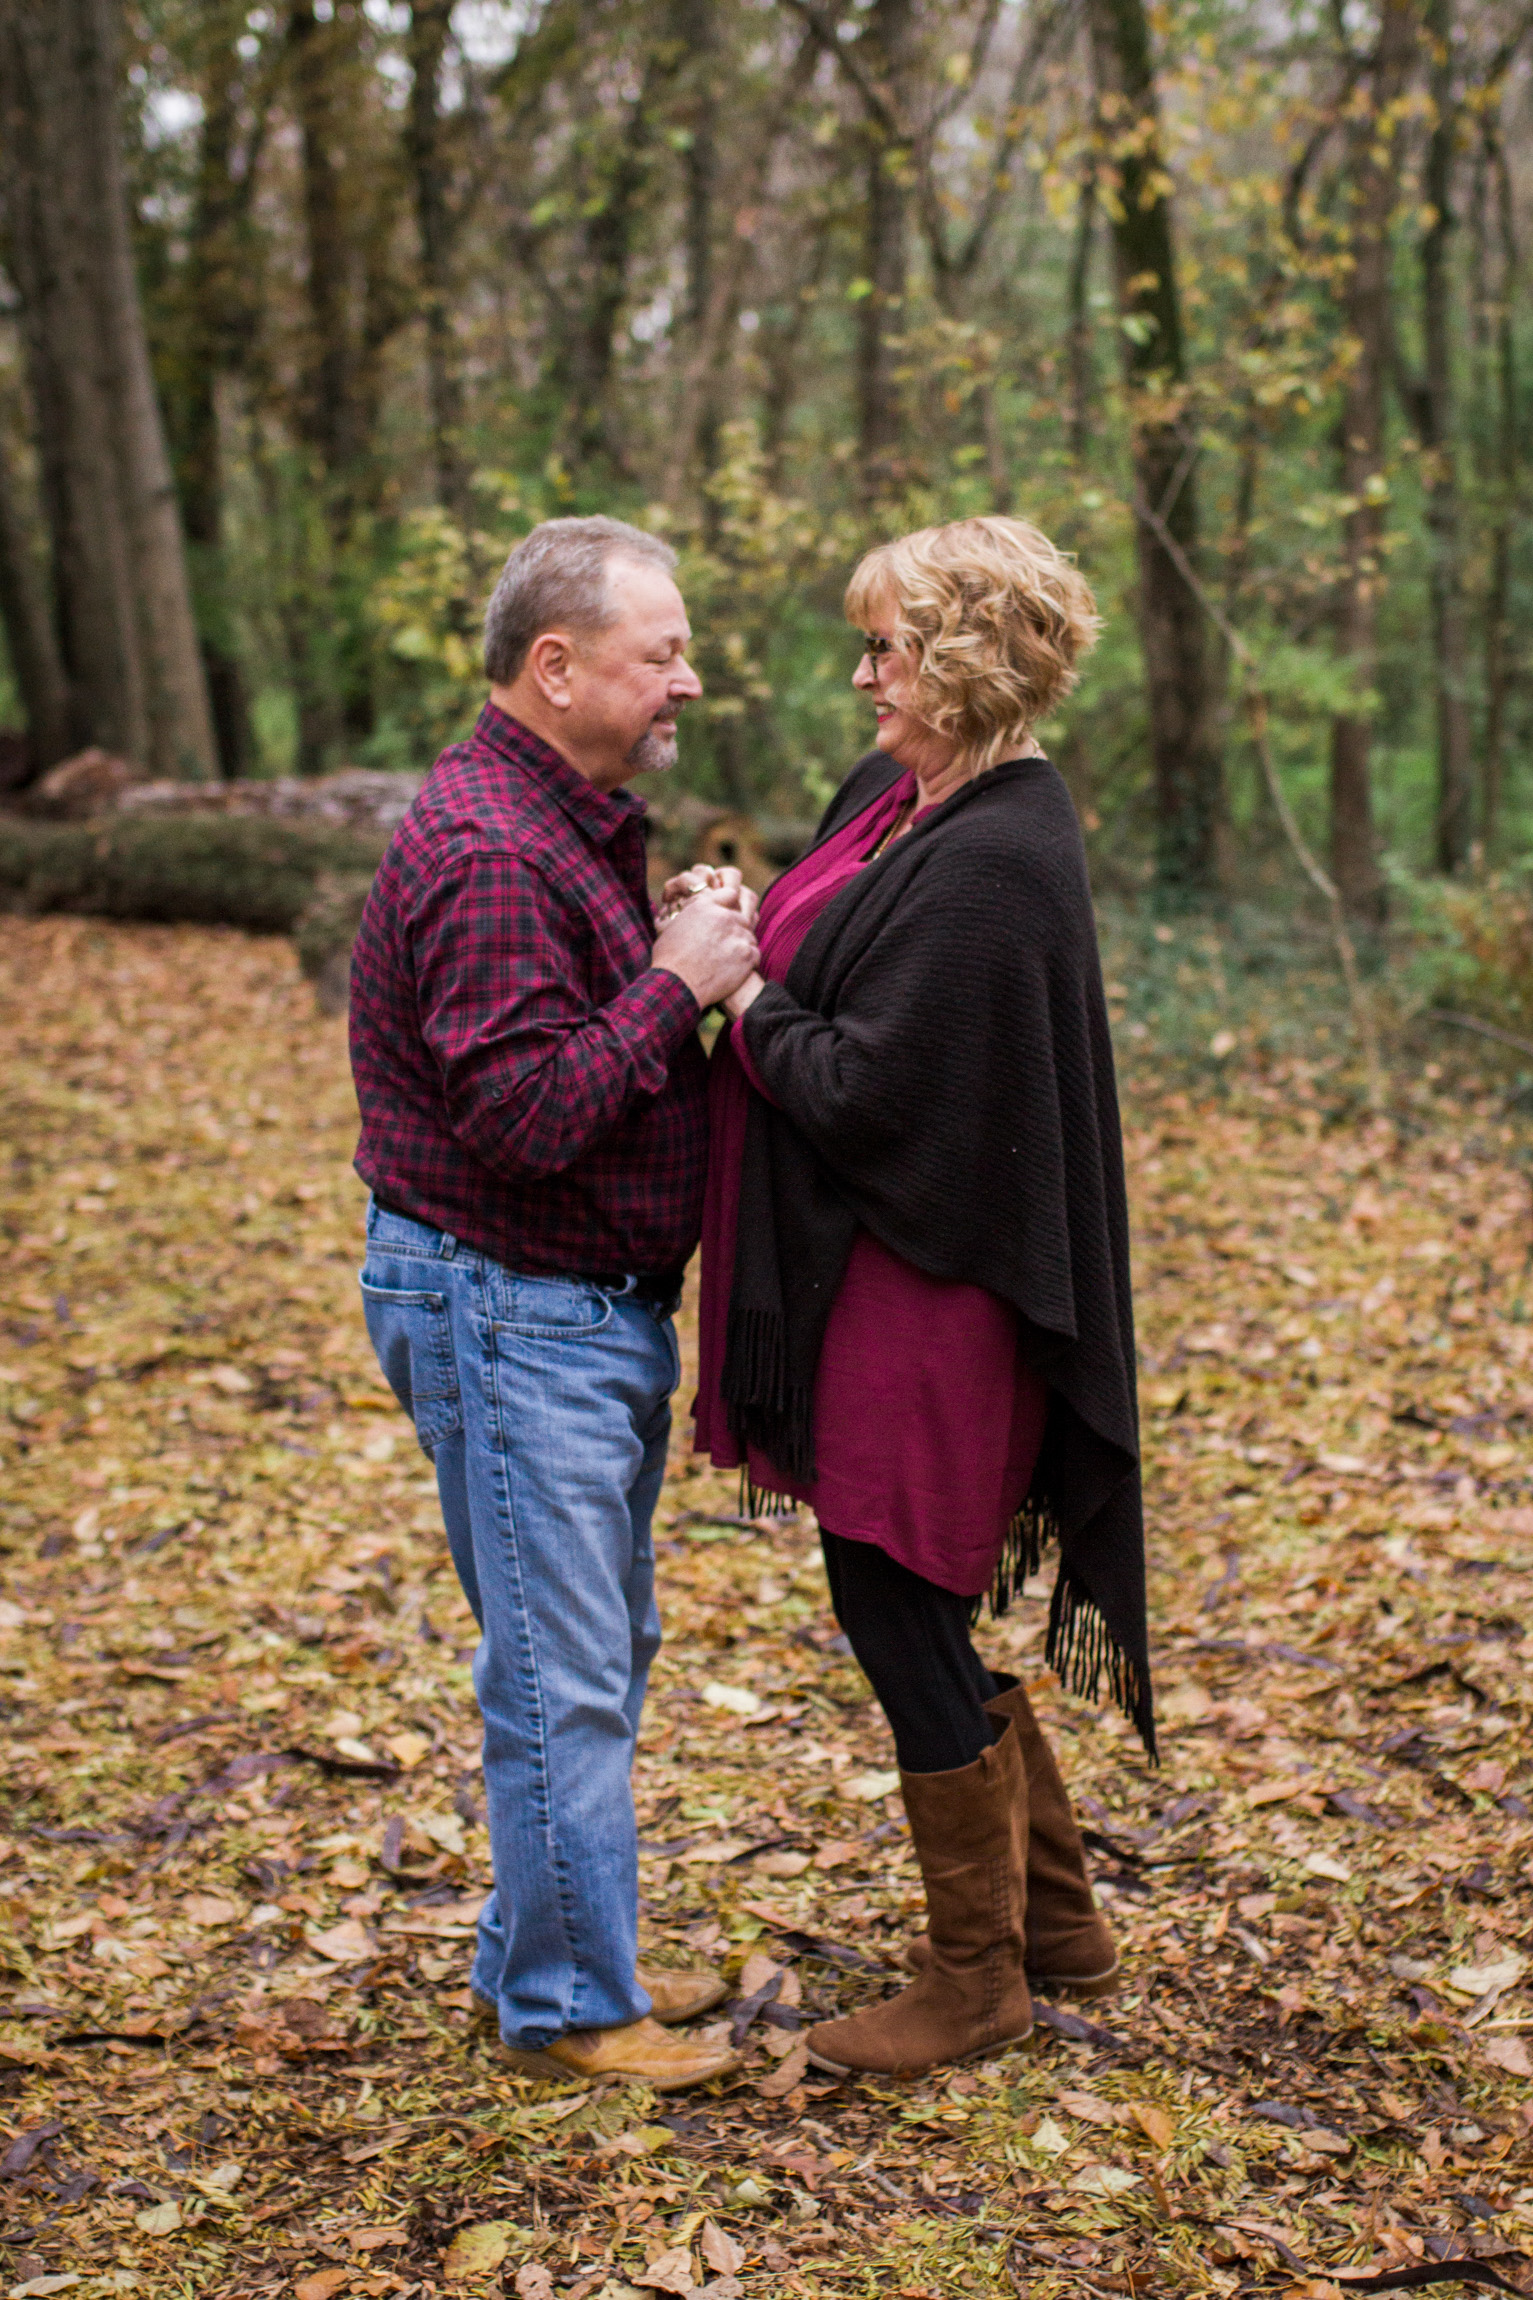  Kansas City lifestyle photographer, Kansas City family photographer, extended family session, fall family photos in the woods, older couple holding hands, grandparents portrait 